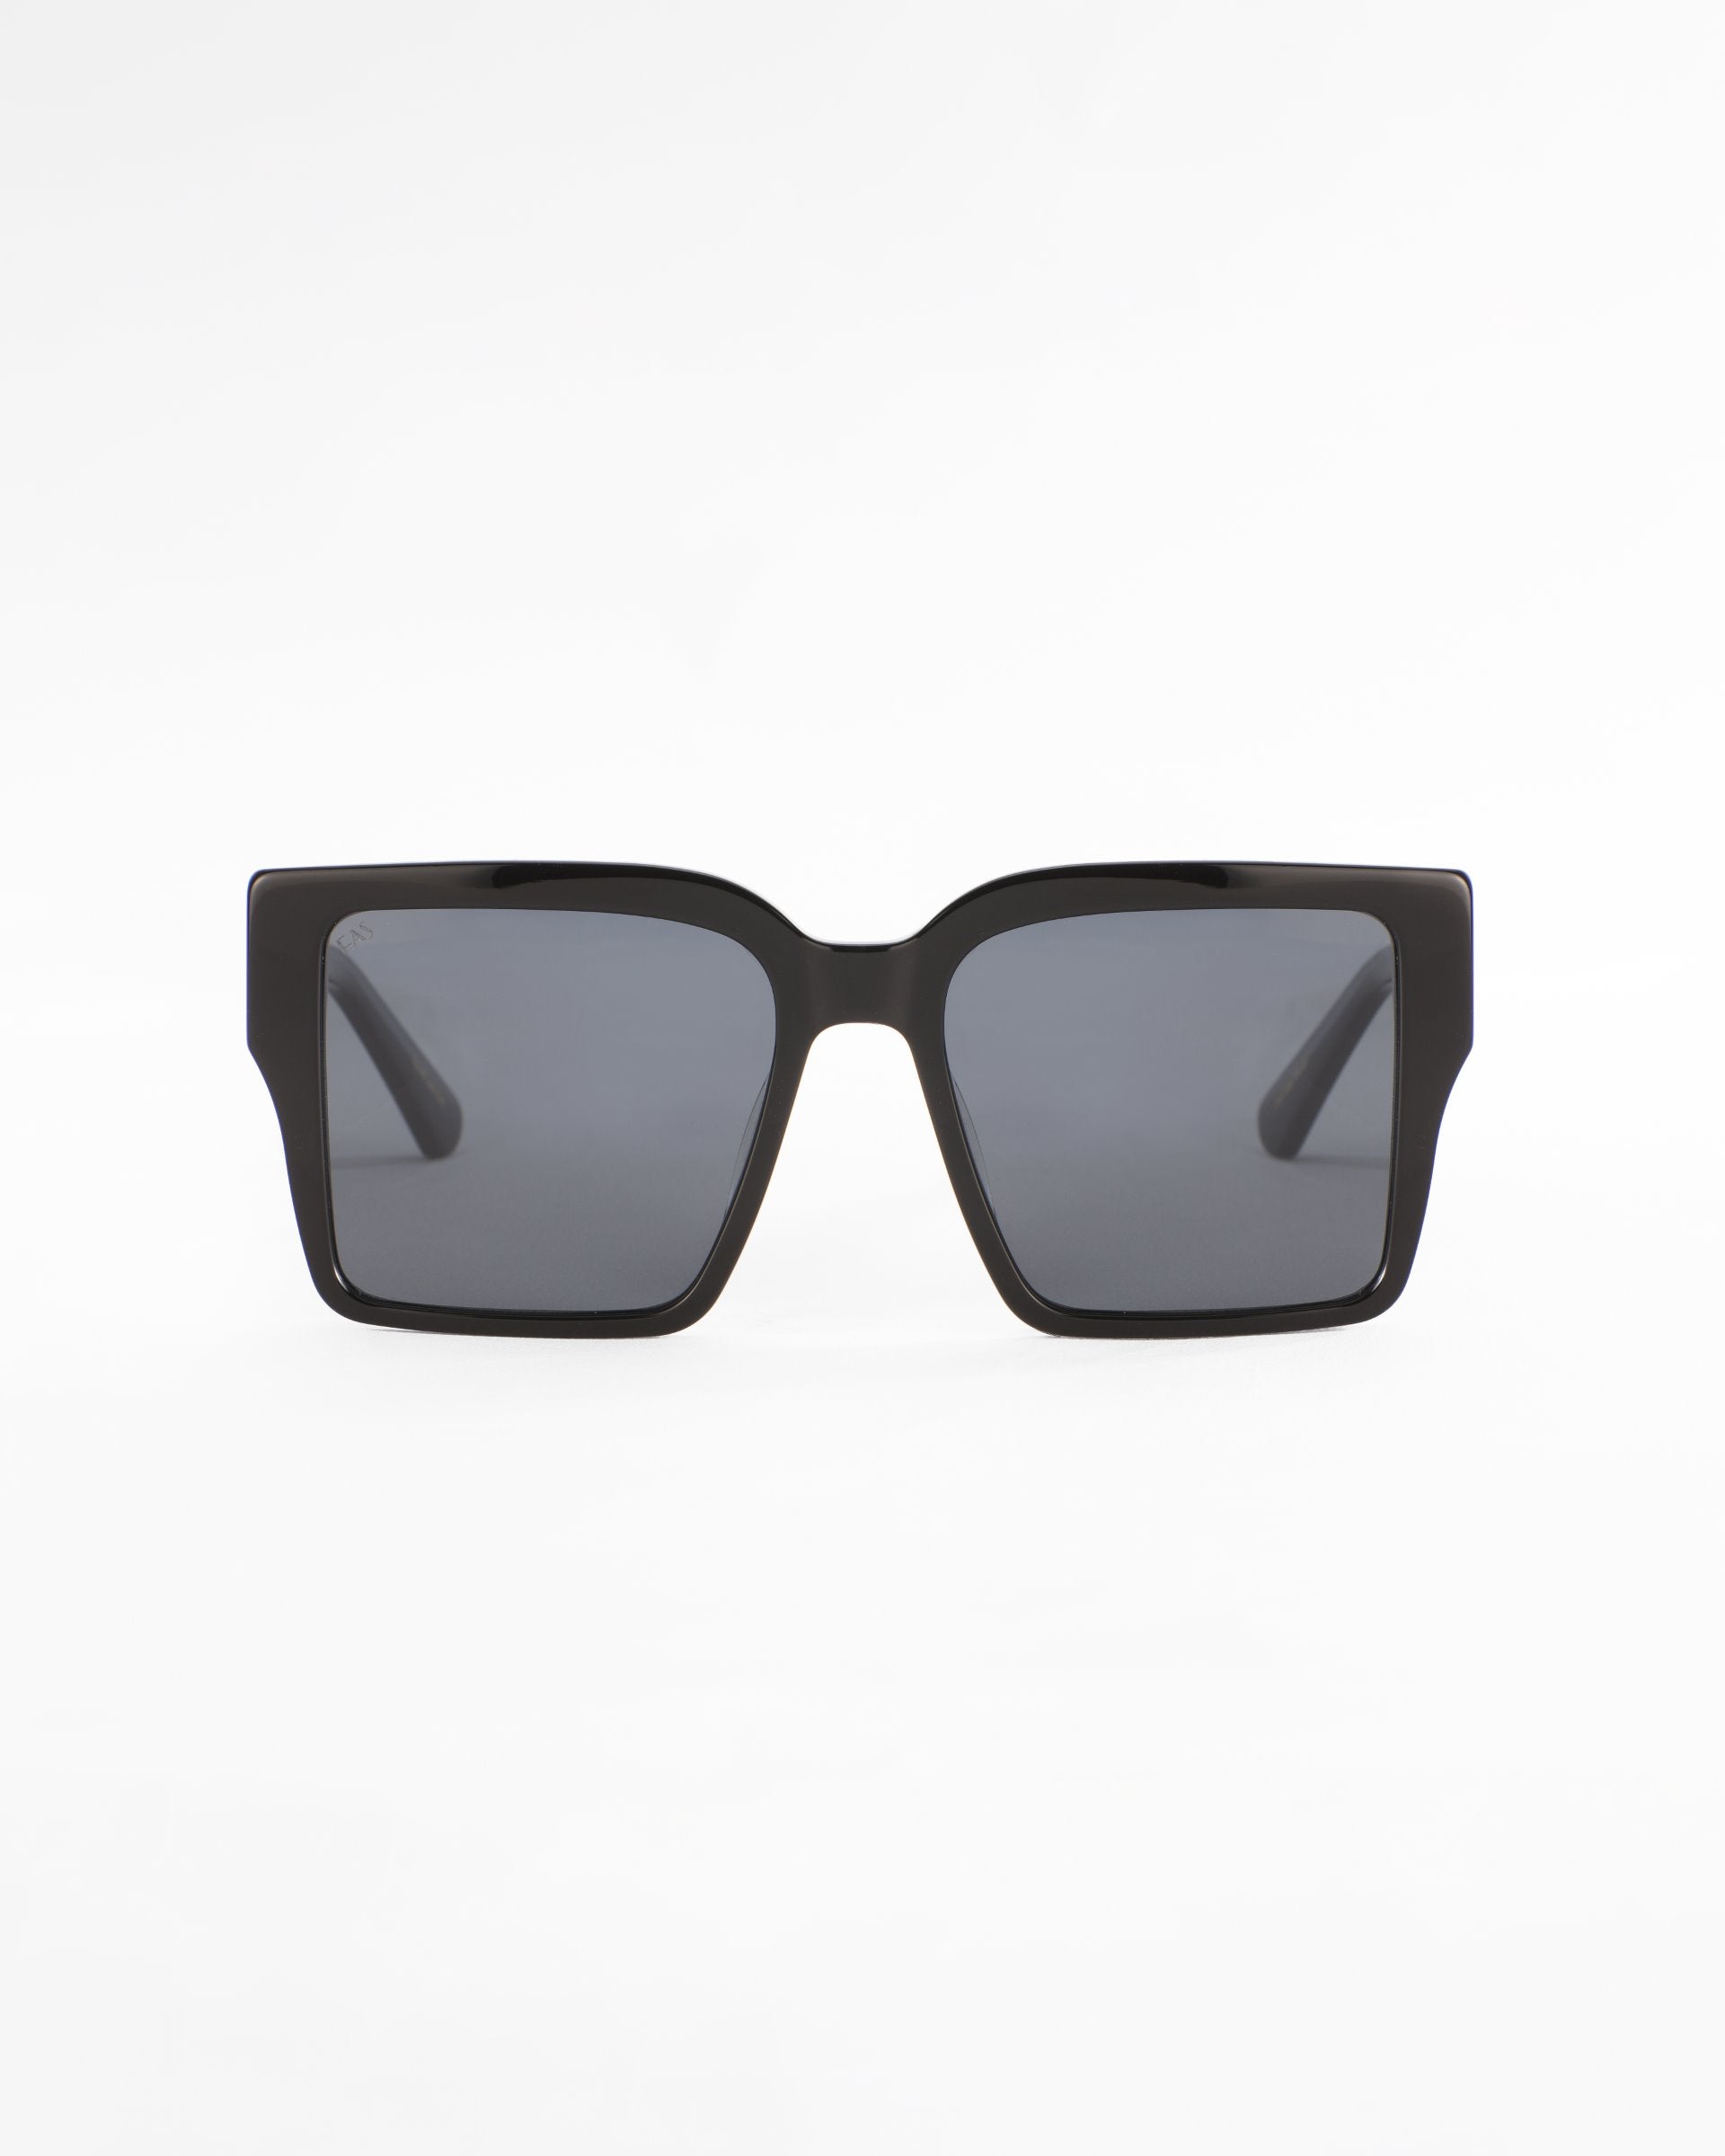 A pair of black rectangular For Art&#39;s Sake® Castle sunglasses with ultra-lightweight lenses is centered against a plain white background. The frames have a simple, modern design with slightly rounded edges.